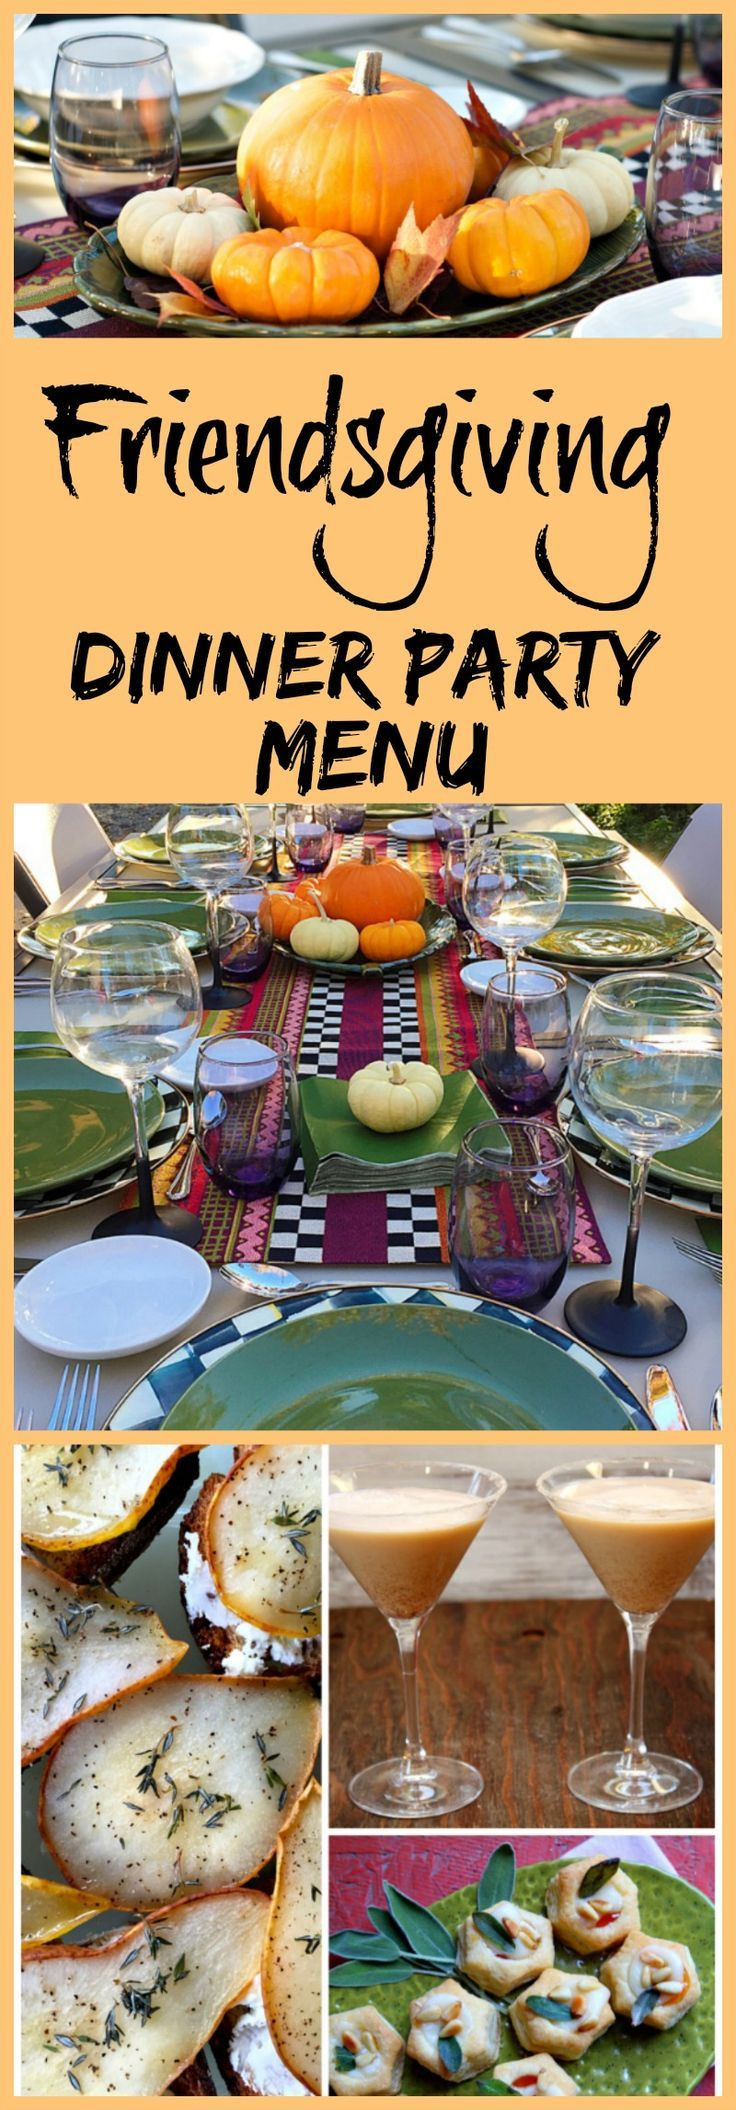 Fall Dinner Party Menu
 How to Host a Friendsgiving Dinner Party Recipes decor